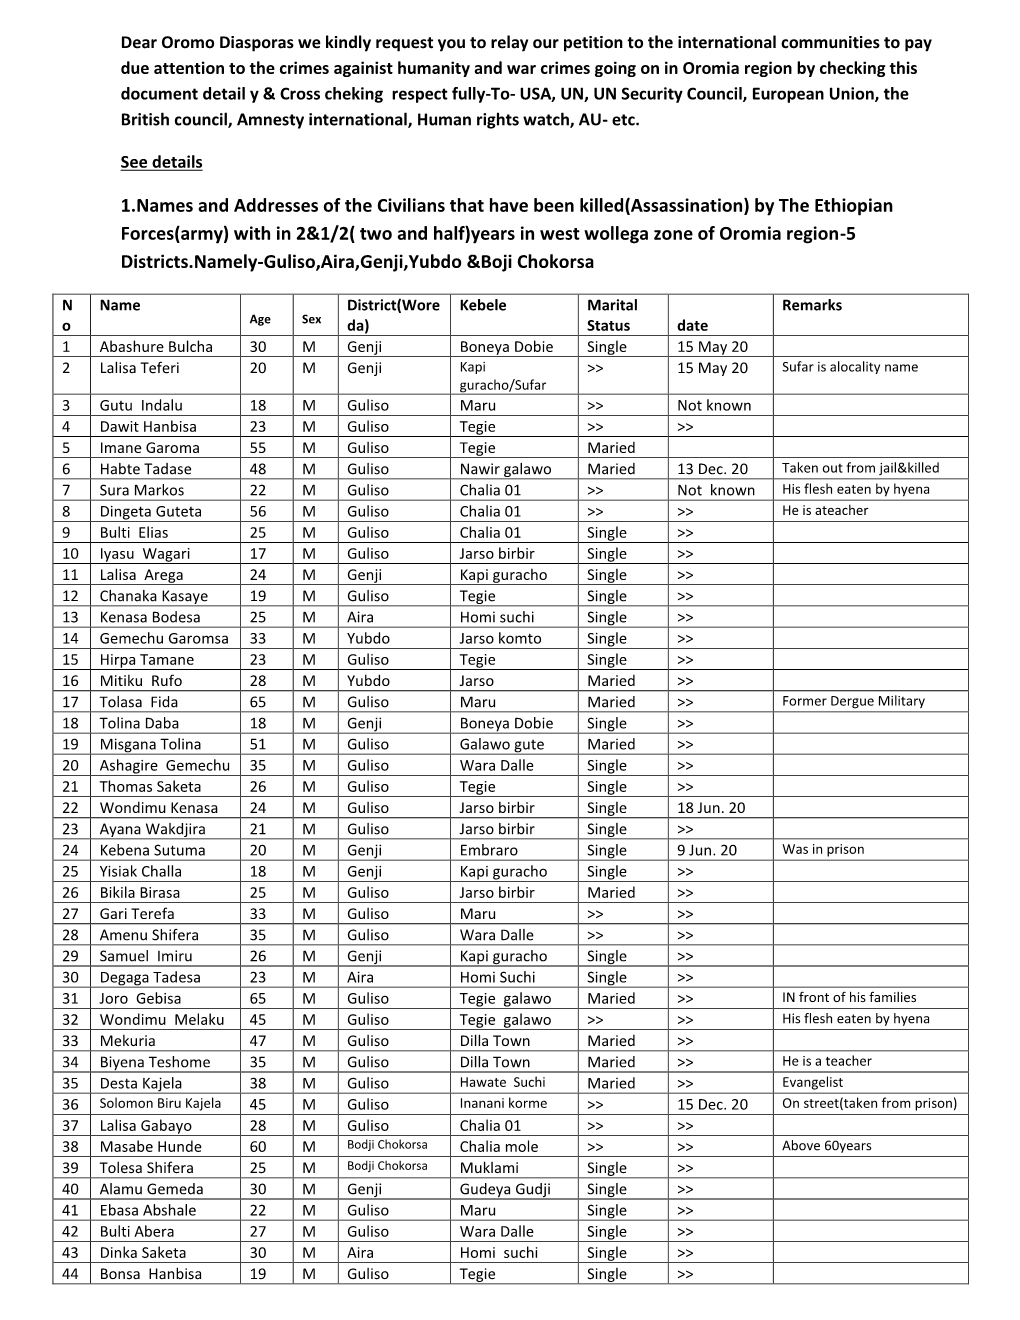 1.Names and Addresses of the Civilians That Have Been Killed